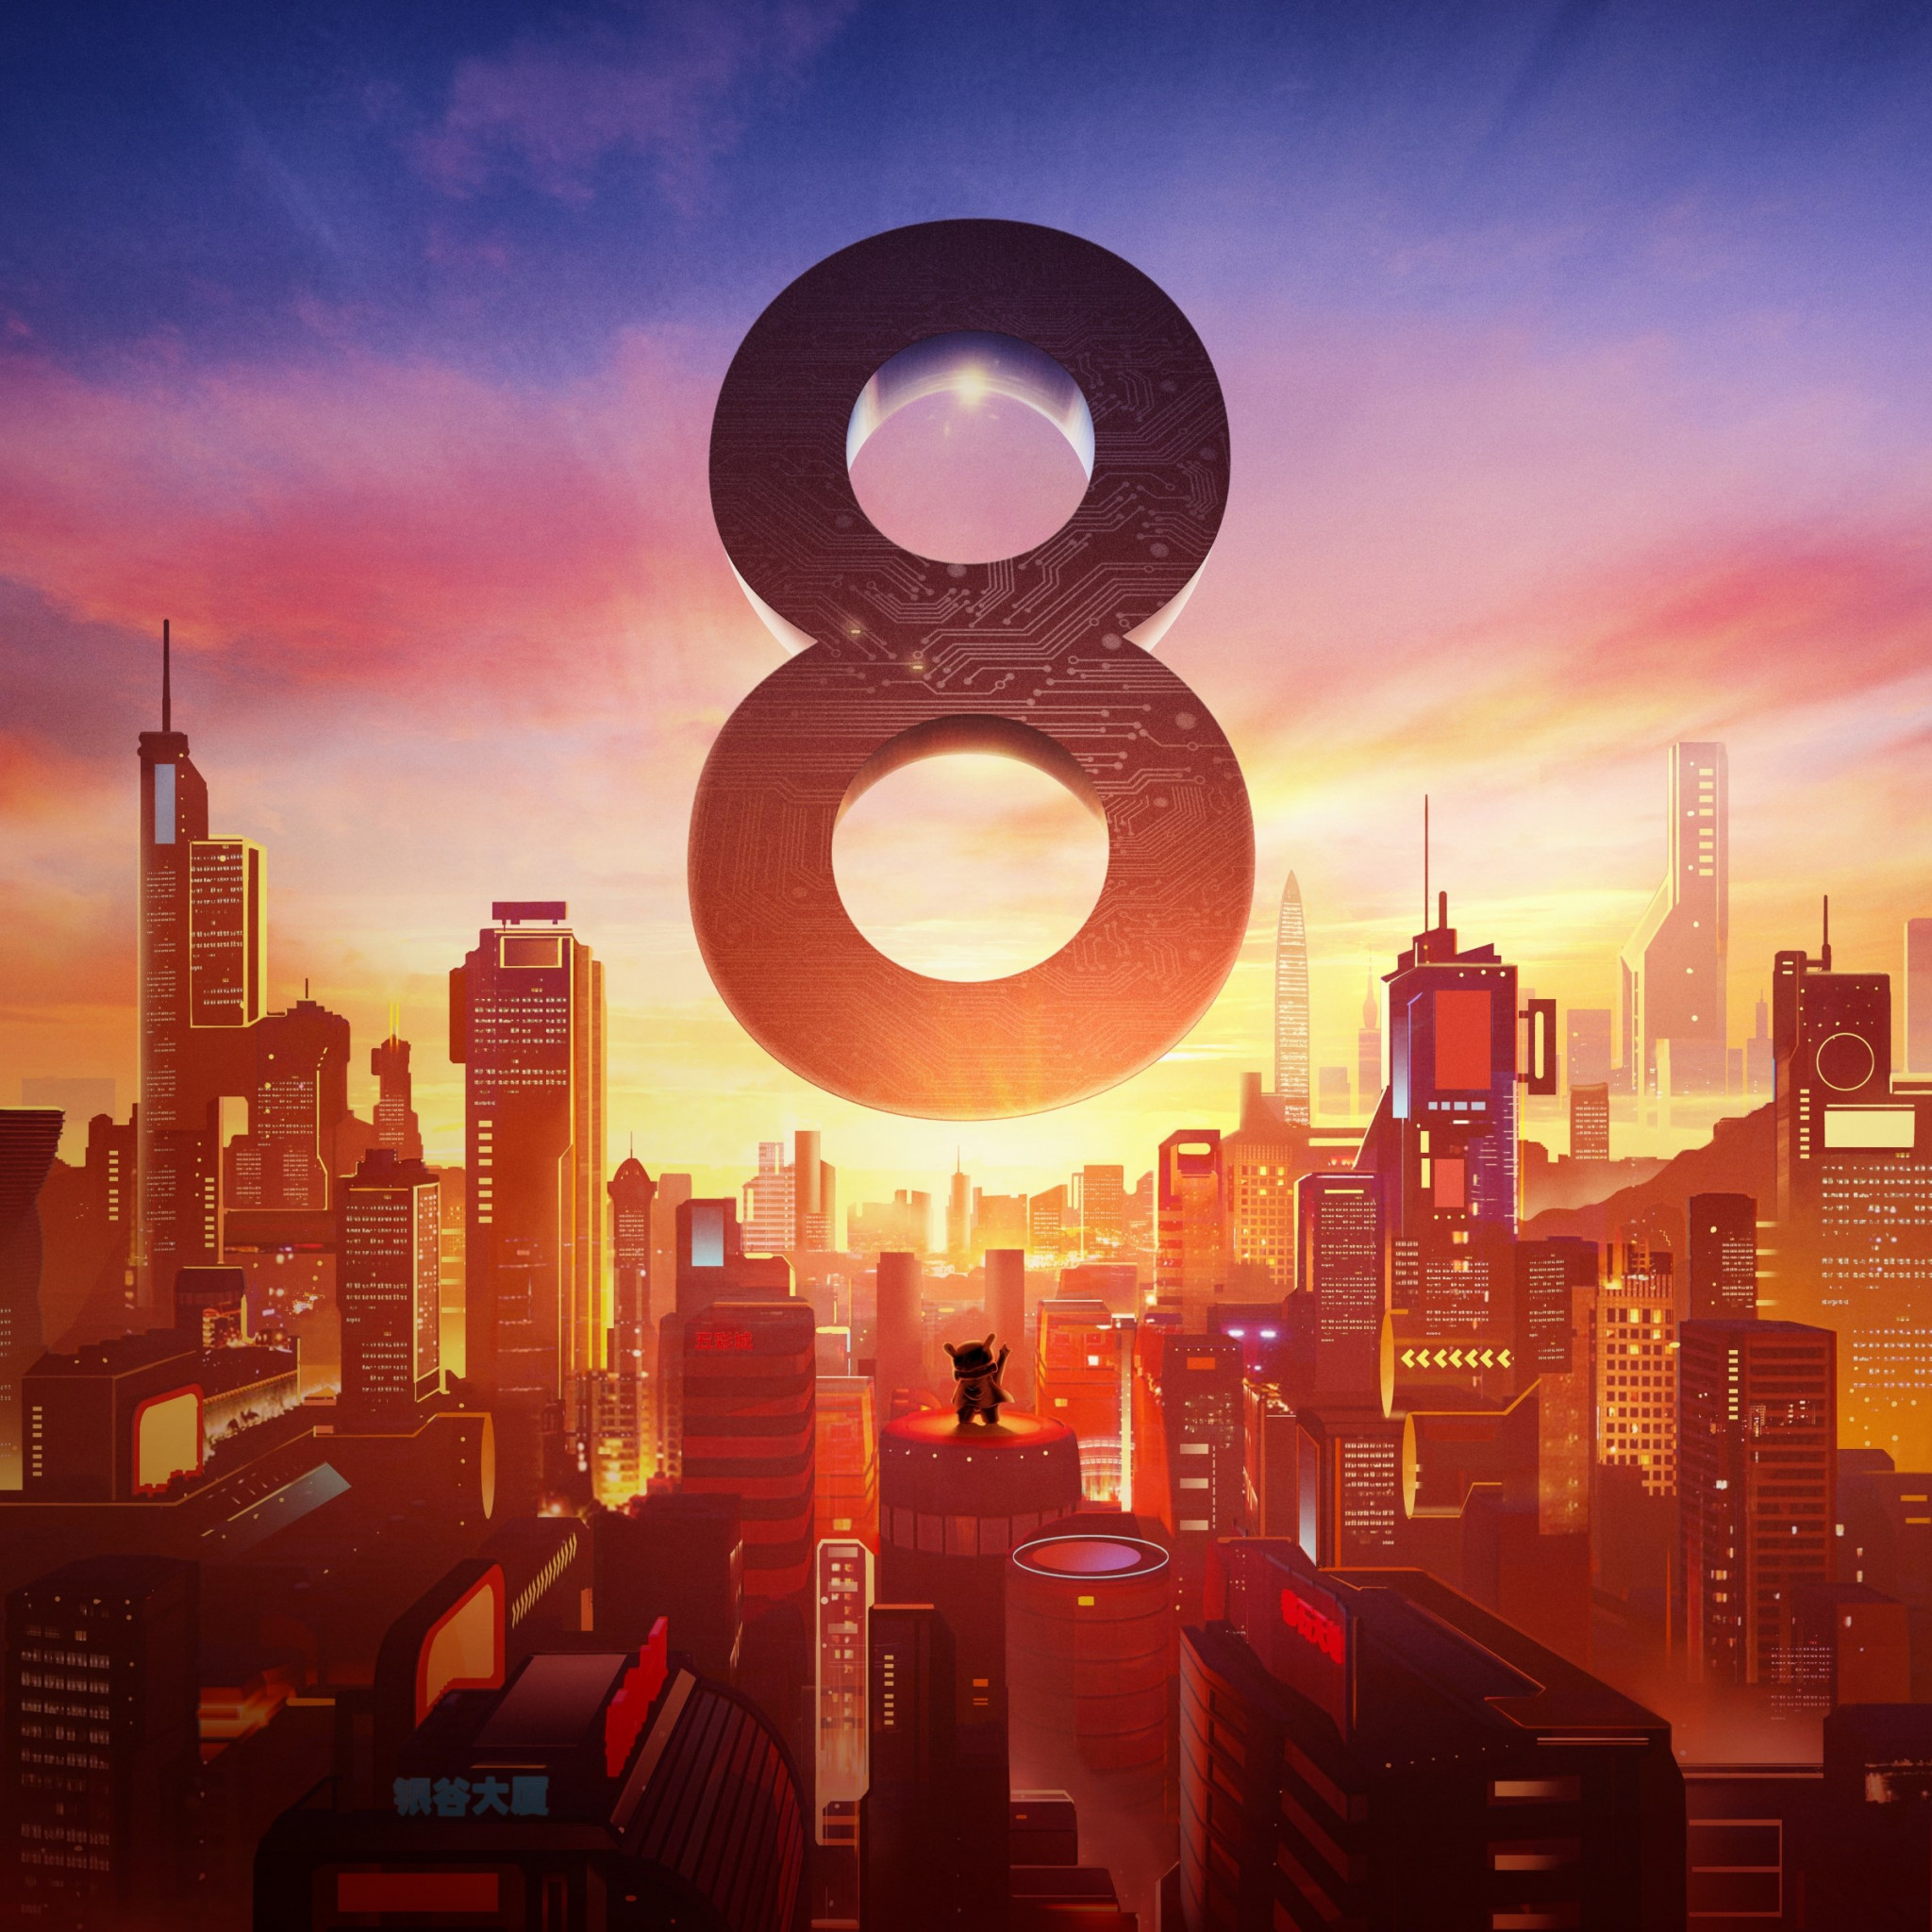 Xiaomi Mi 8. Poster from the launch event wallpaper 2048x2048